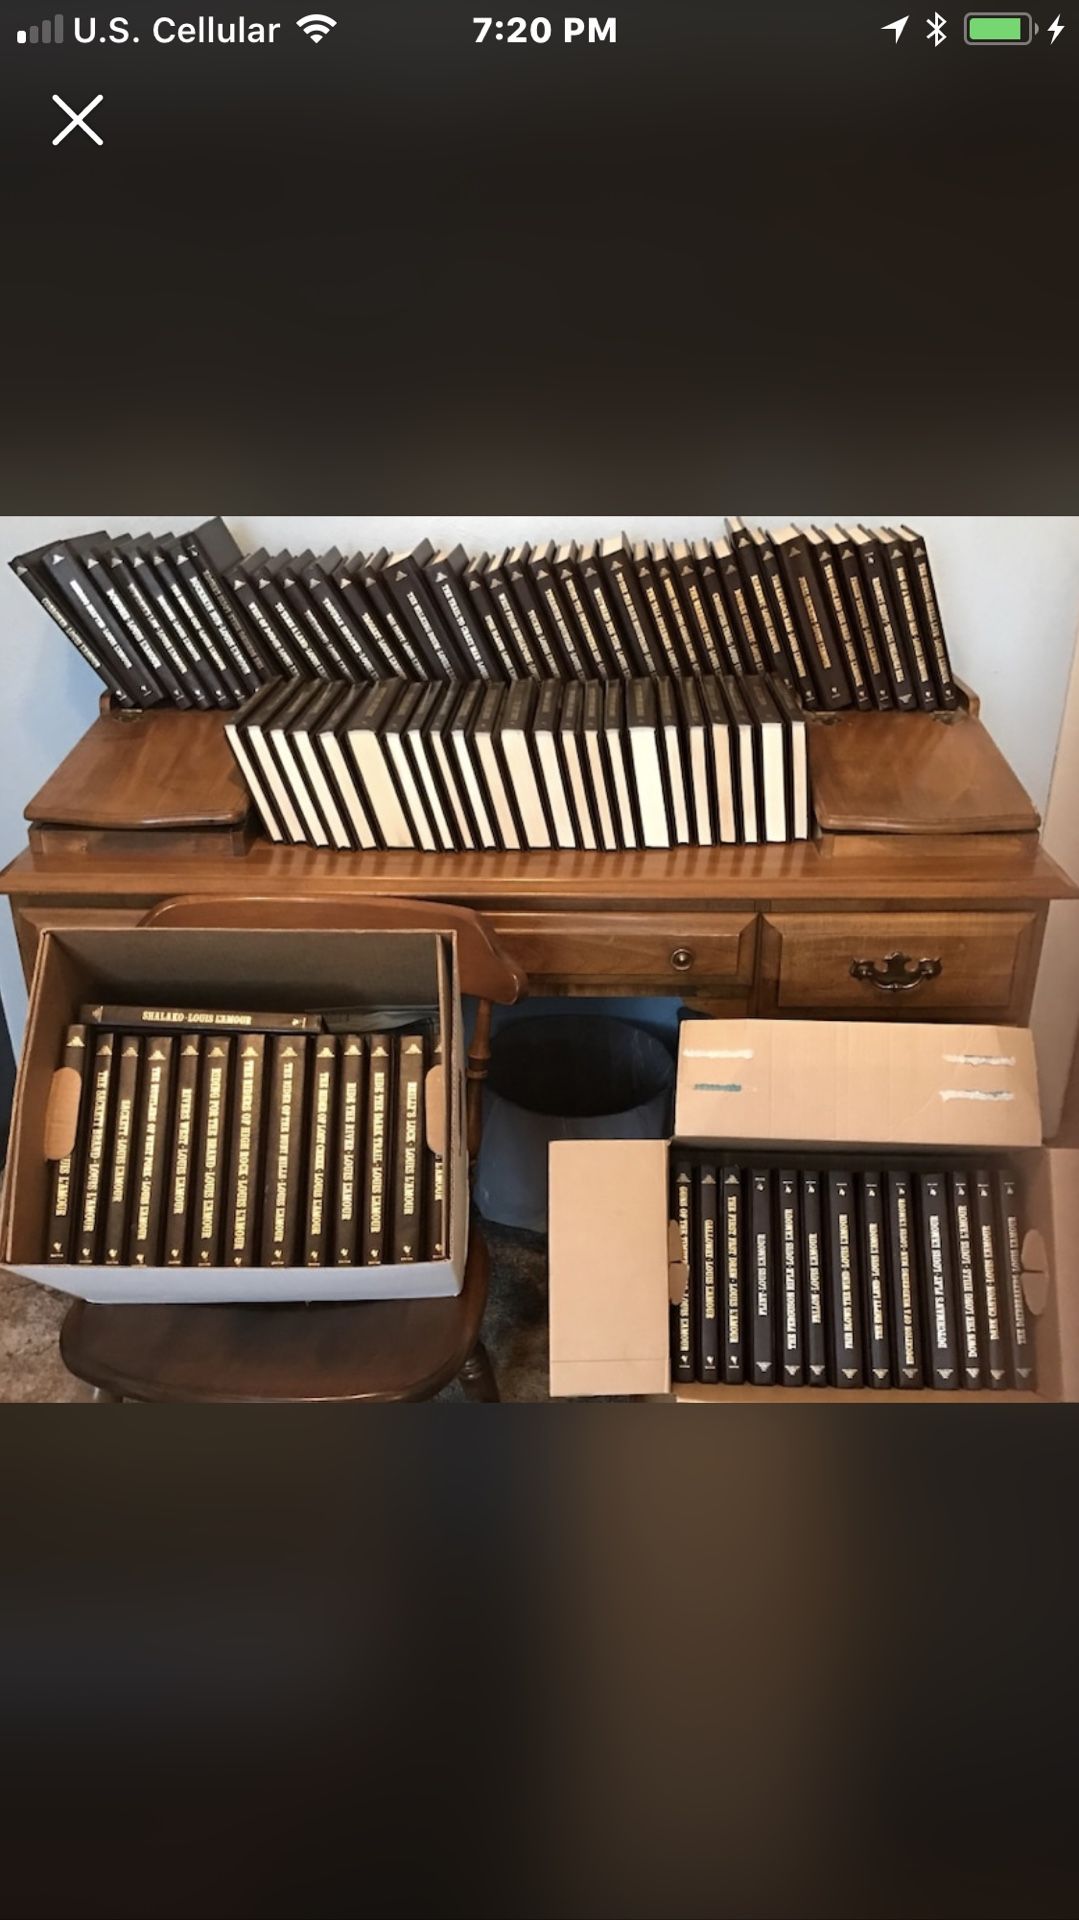 Set of 107 Louis L’aMour leather bound books. $500.00